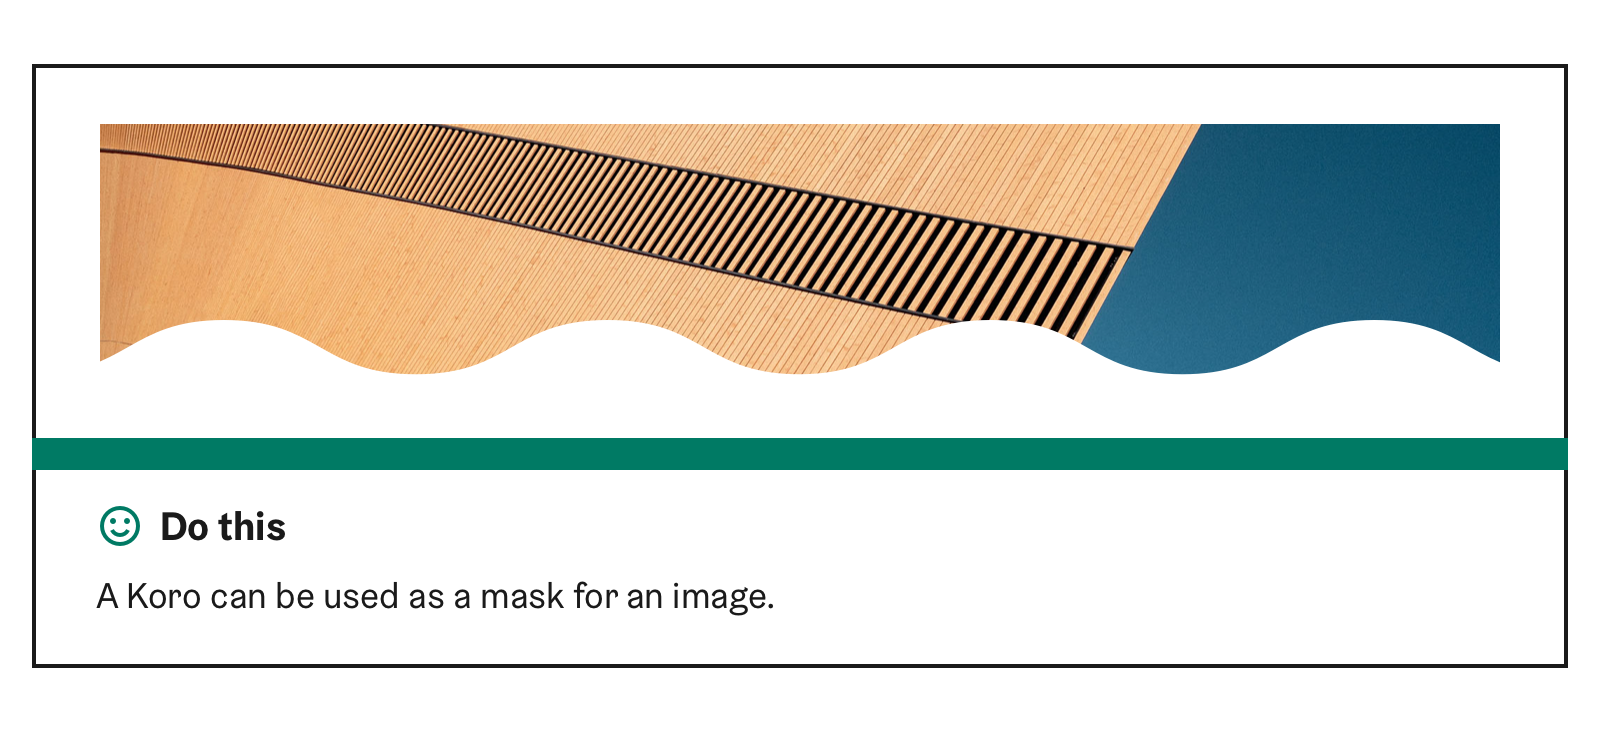 Koro shape used as a mask for an image